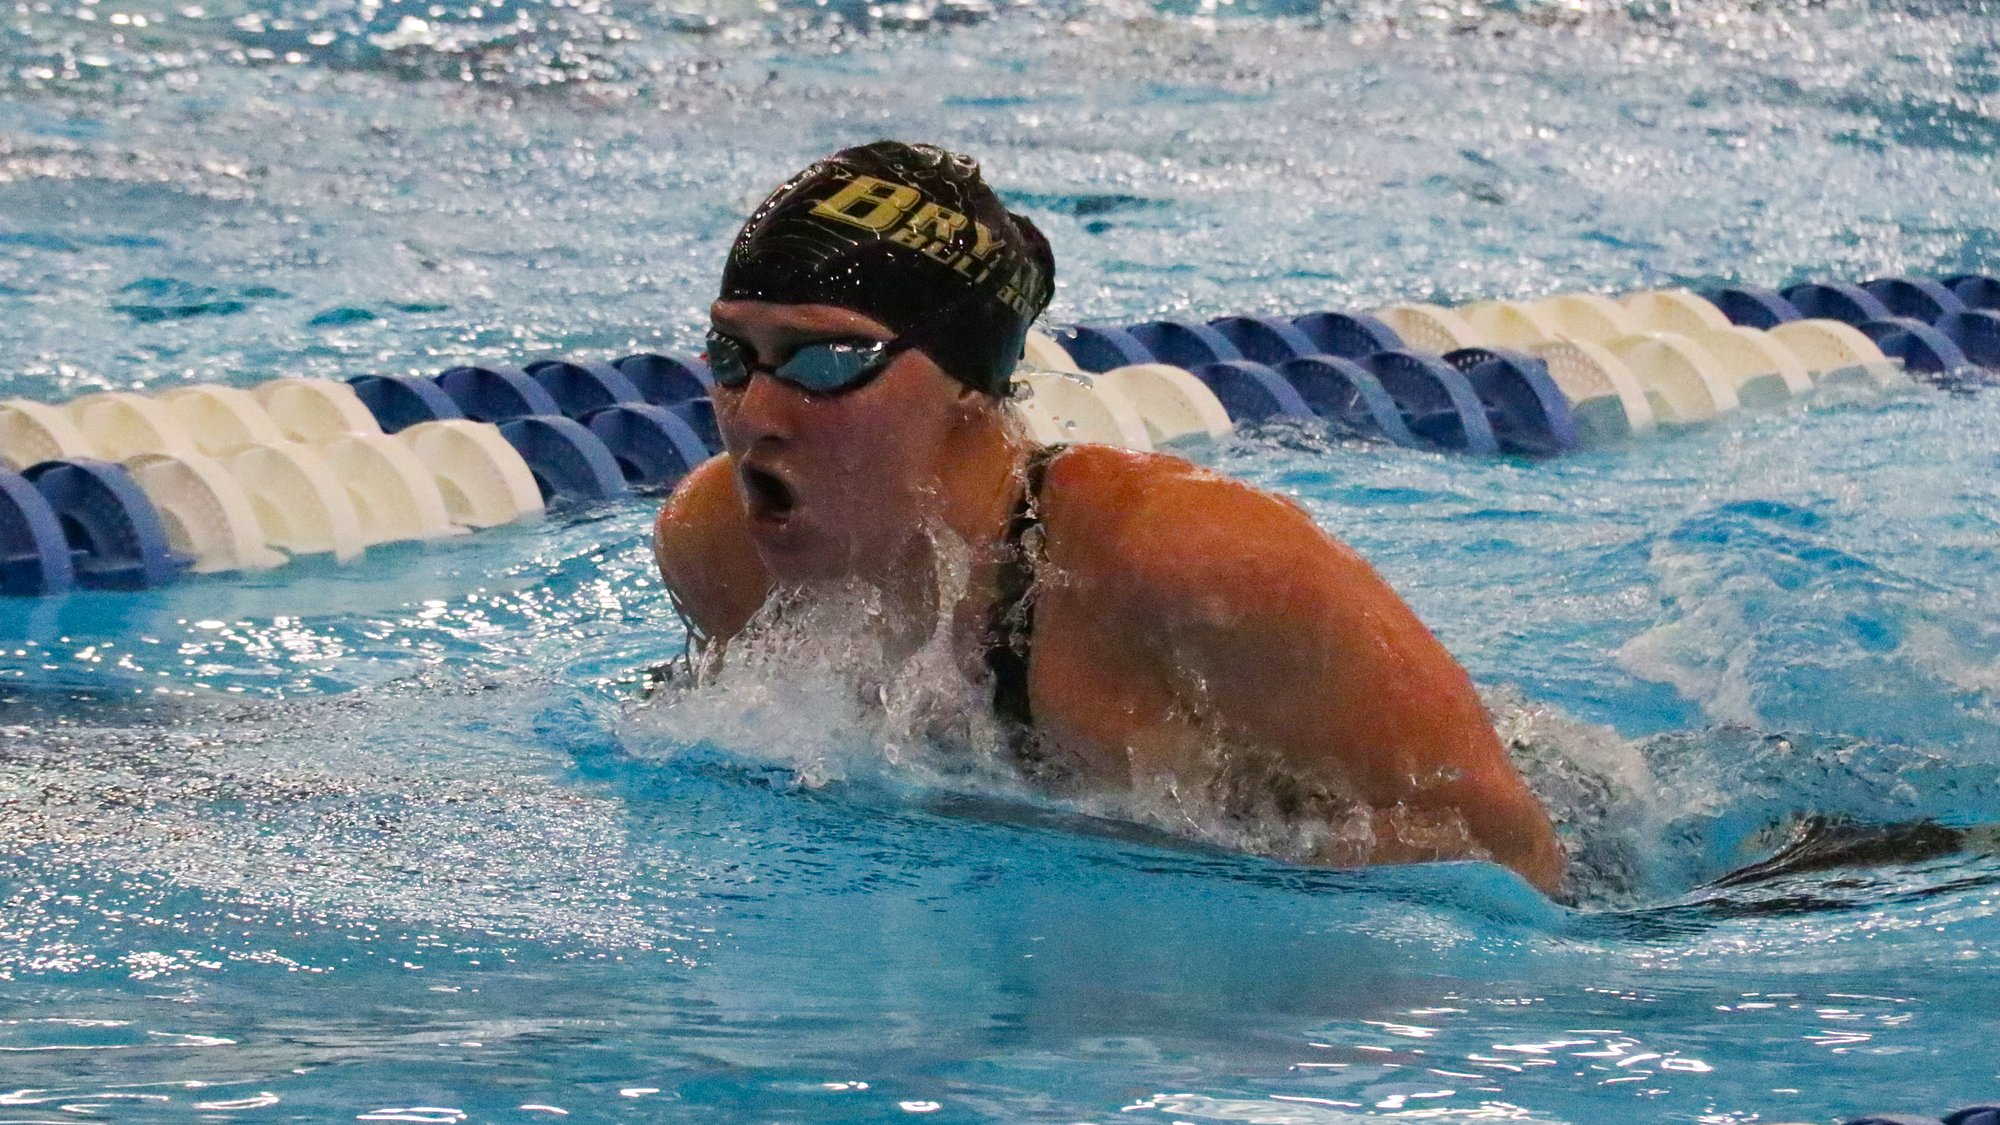 Kuipers to Compete at FINA World Championships